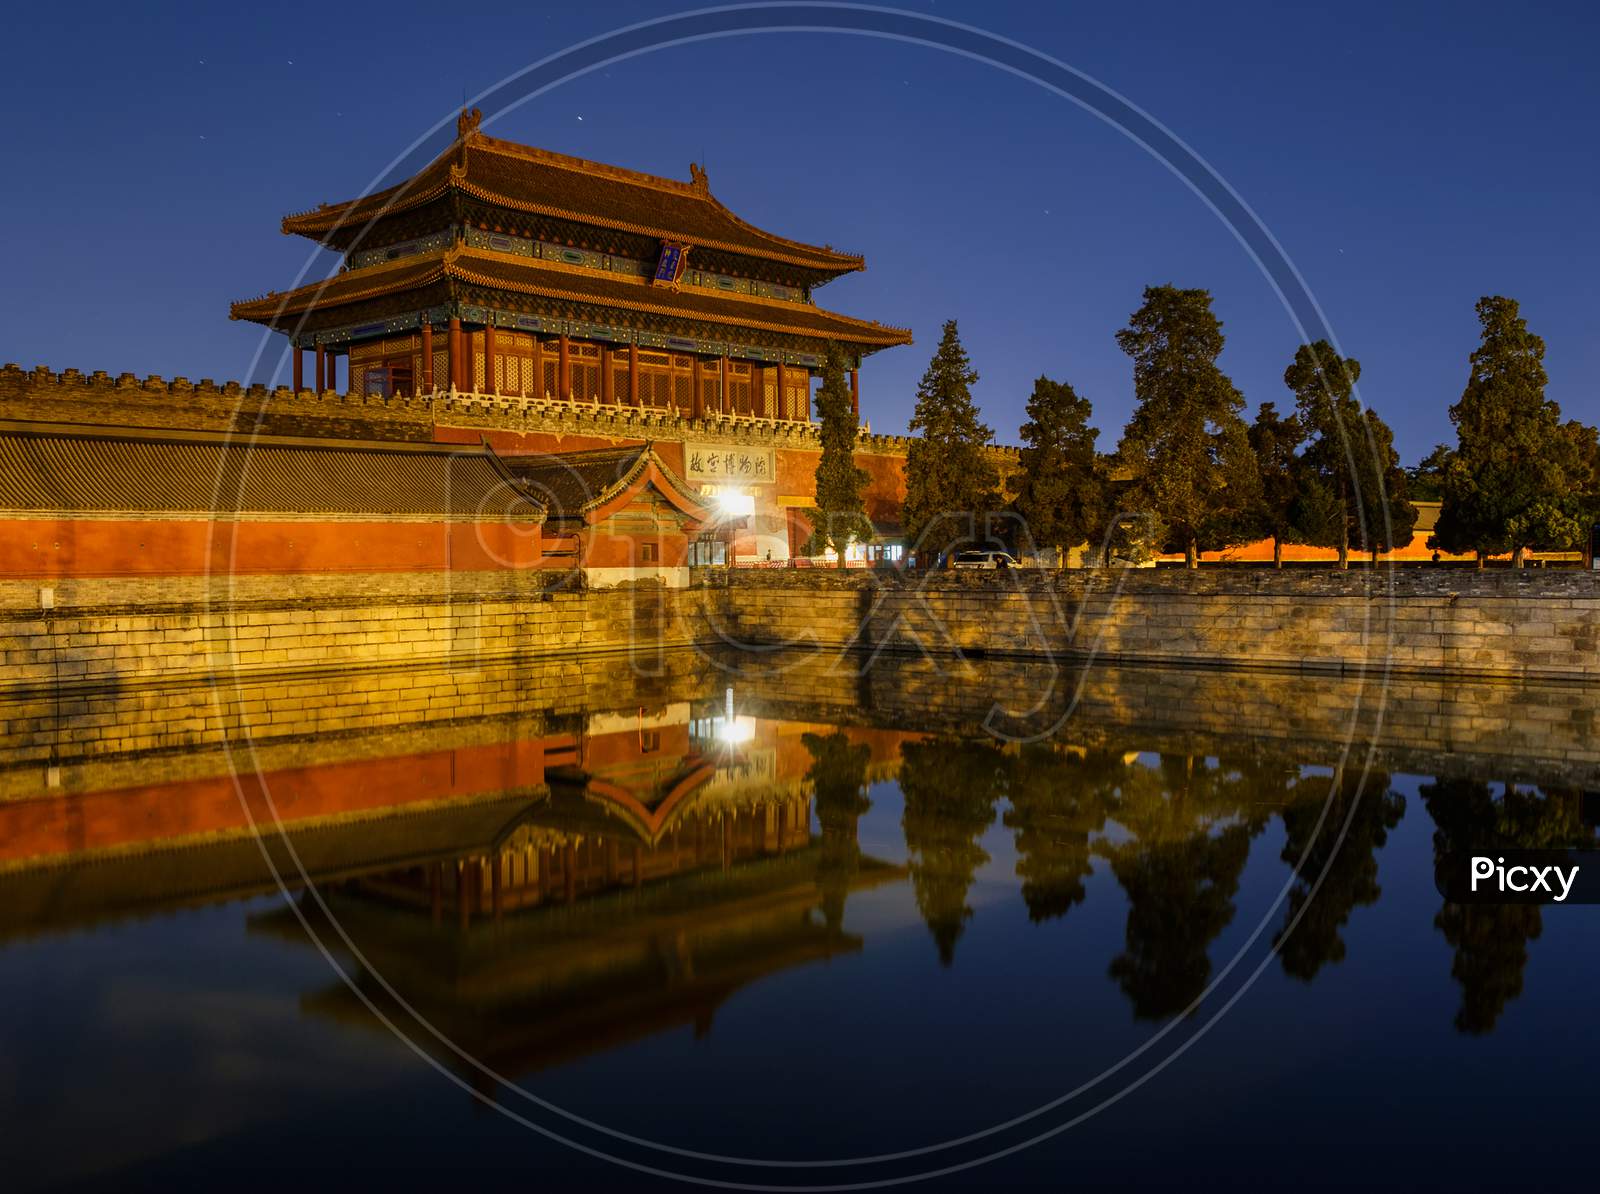 The Gate Of Divine Might, North Exit Gate Of The Forbidden City Palace Museum, Reflecting In The Water Moat In Beijing, China